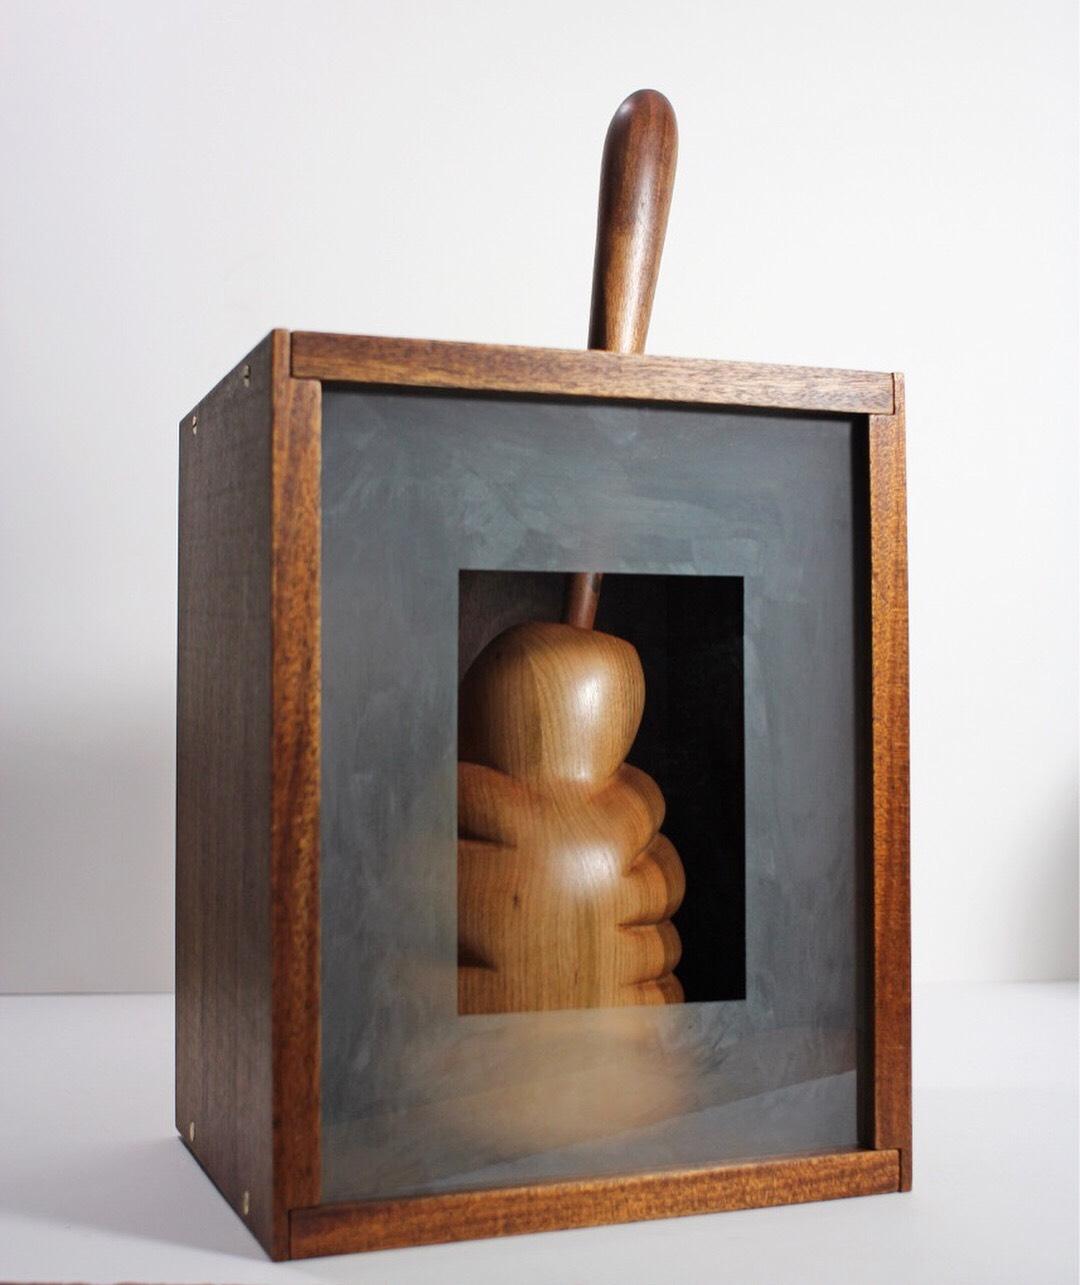 John Maloof Abstract Sculpture - sculpture in wood and glass, Encapsulated organic form